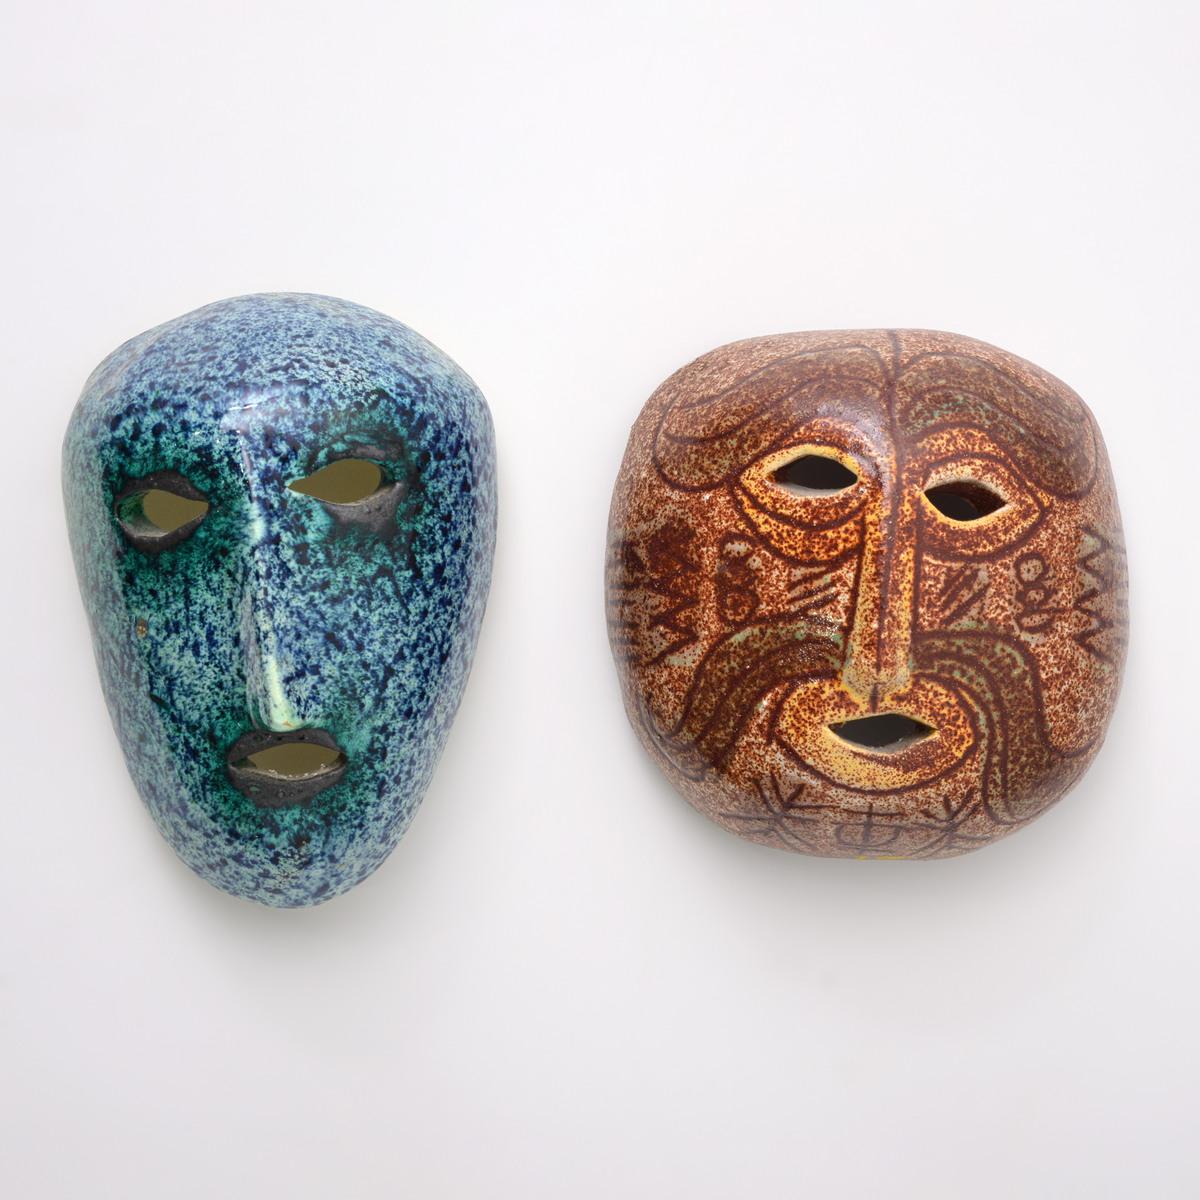 Unknown Figurative Sculpture - 2 Slavic Paley for Accolay Pottery Masks